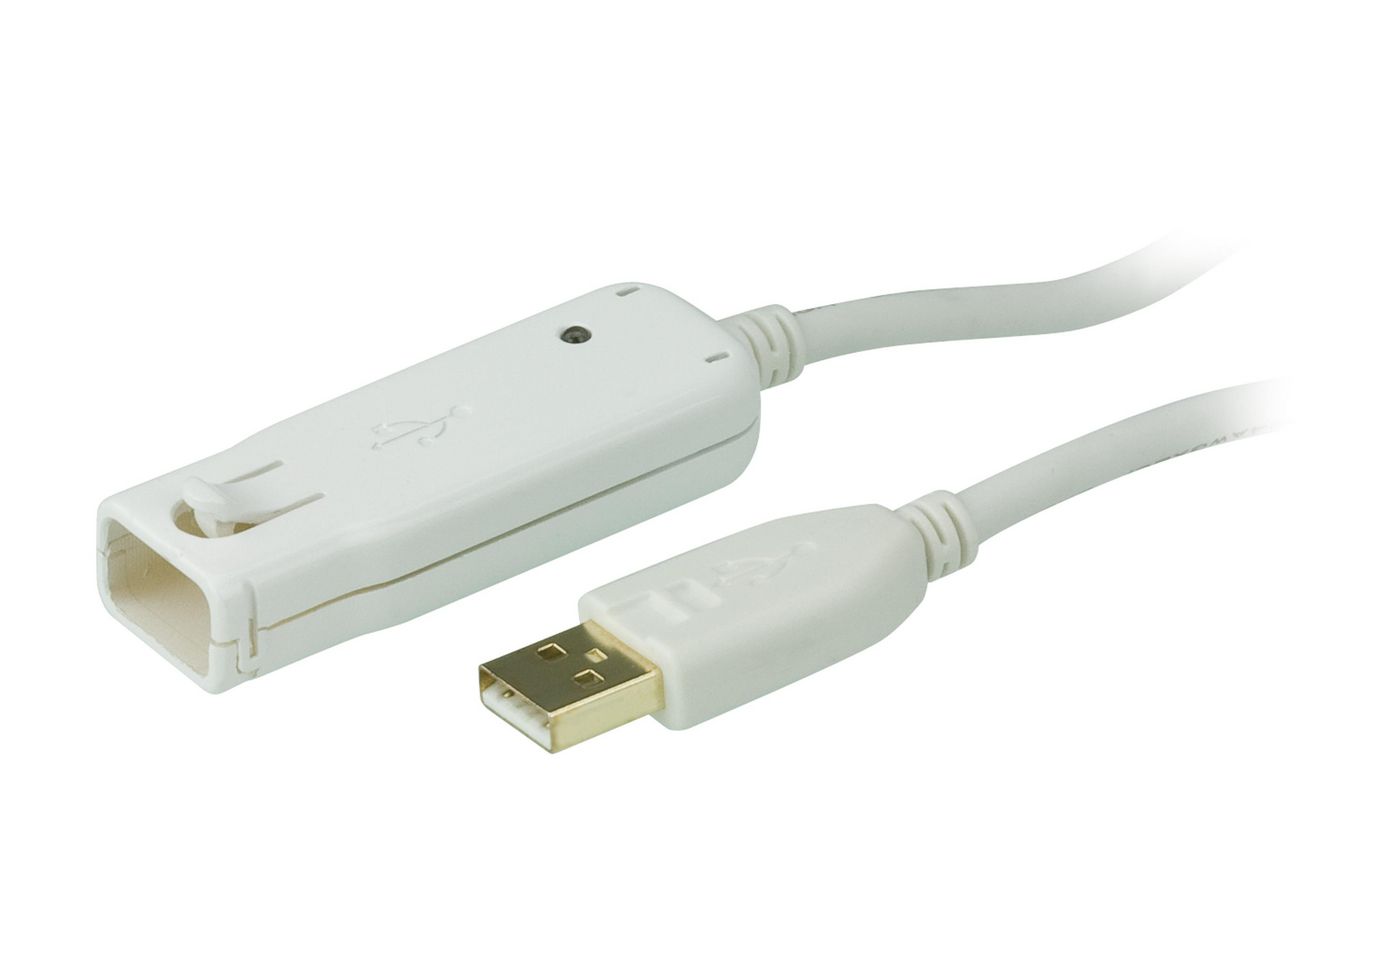 Aten UE2120 USB 2.0 Extension cable 